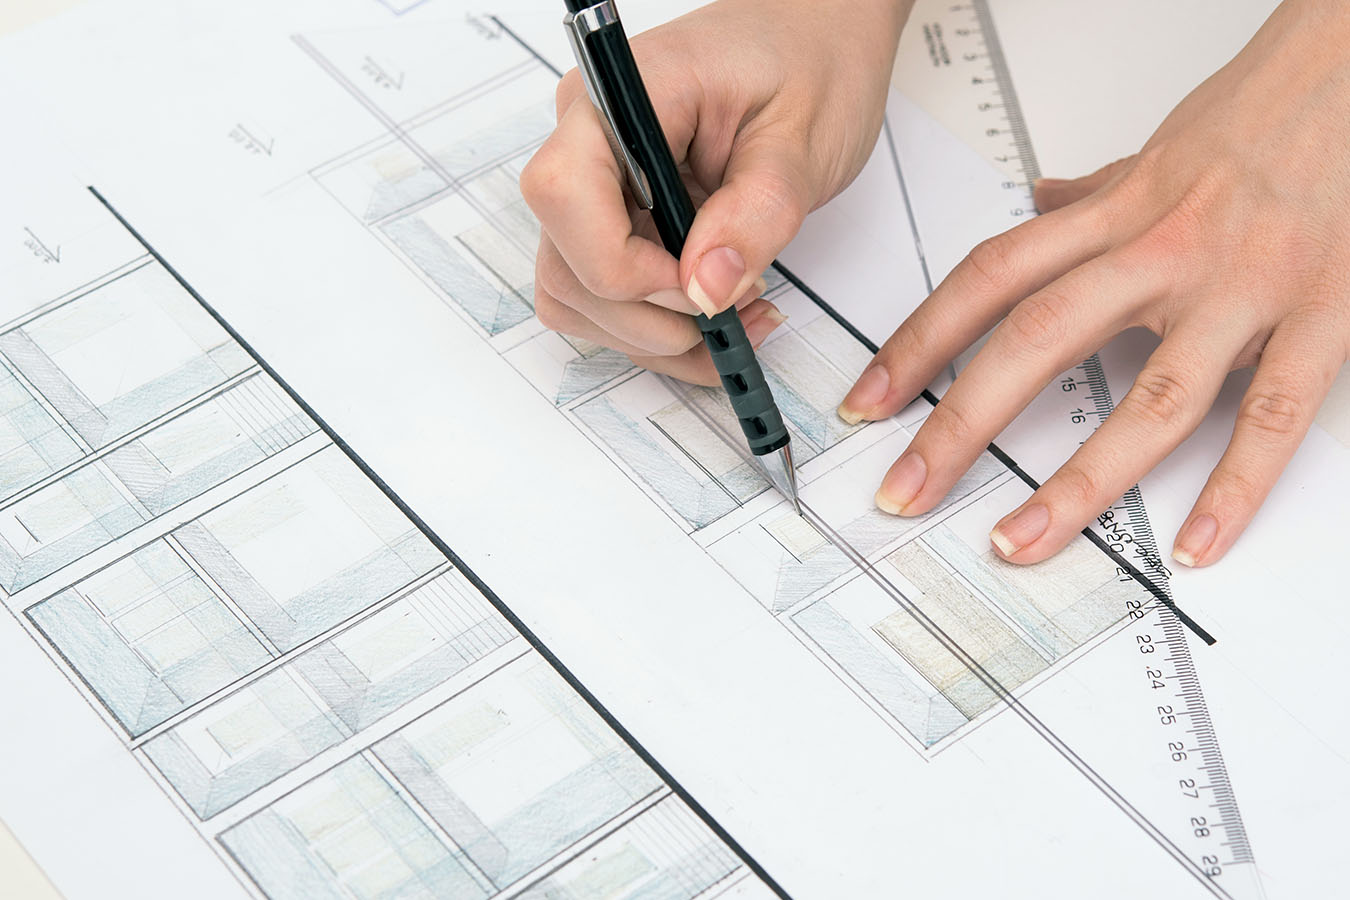  Architectural Assignment Assistance: Navigating the Built Environment